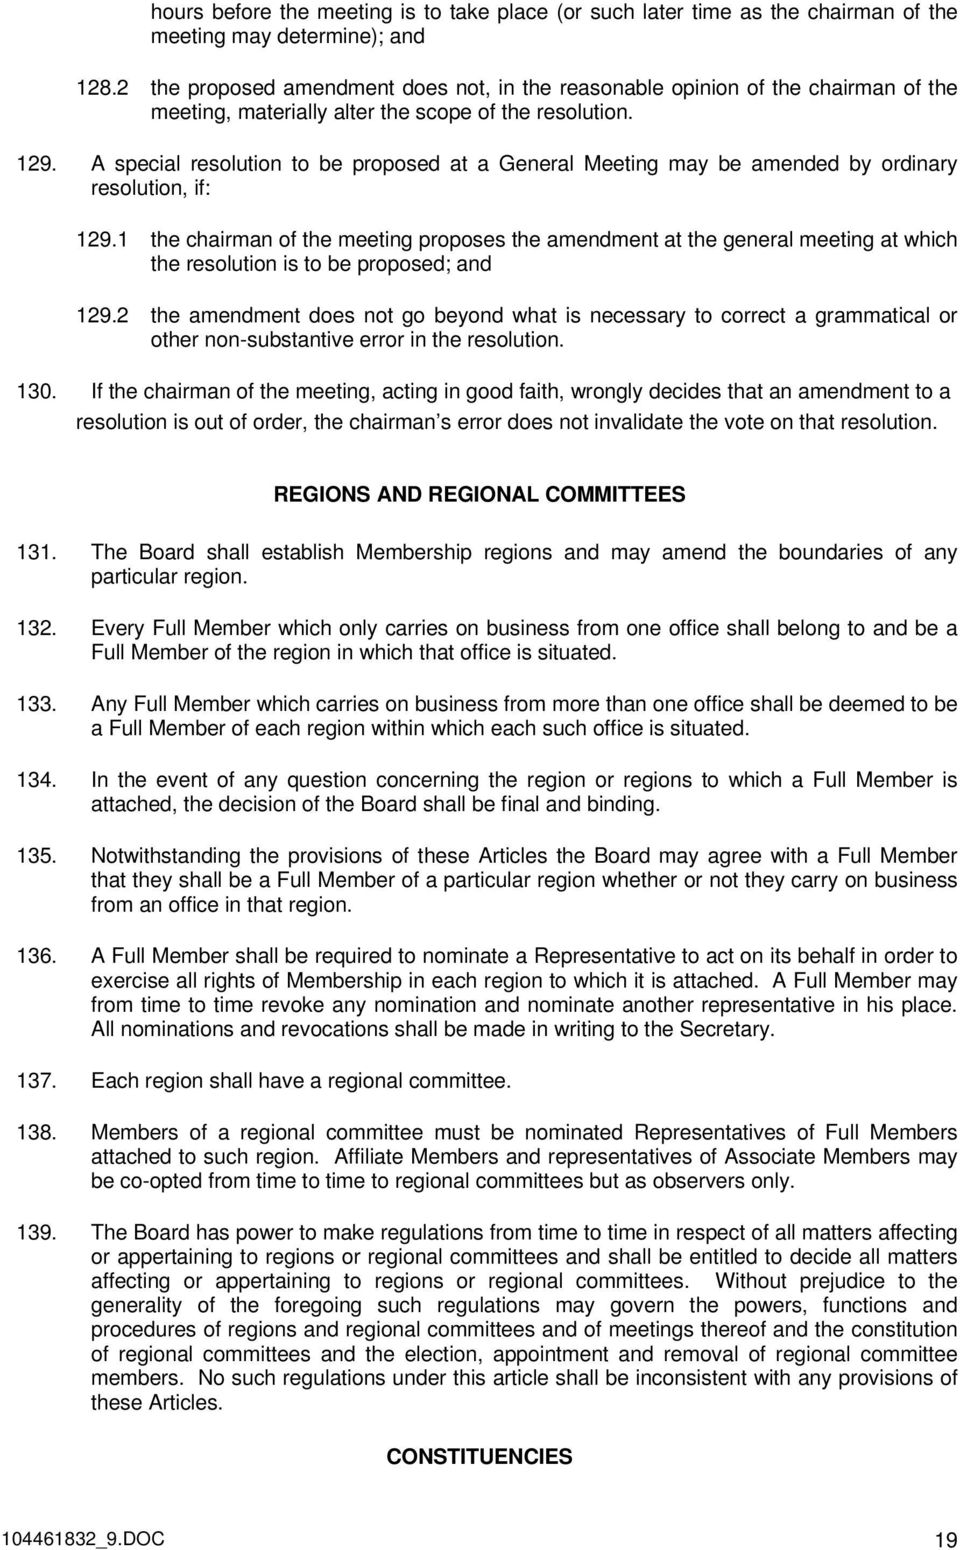 A special resolution to be proposed at a General Meeting may be amended by ordinary resolution, if: 129.